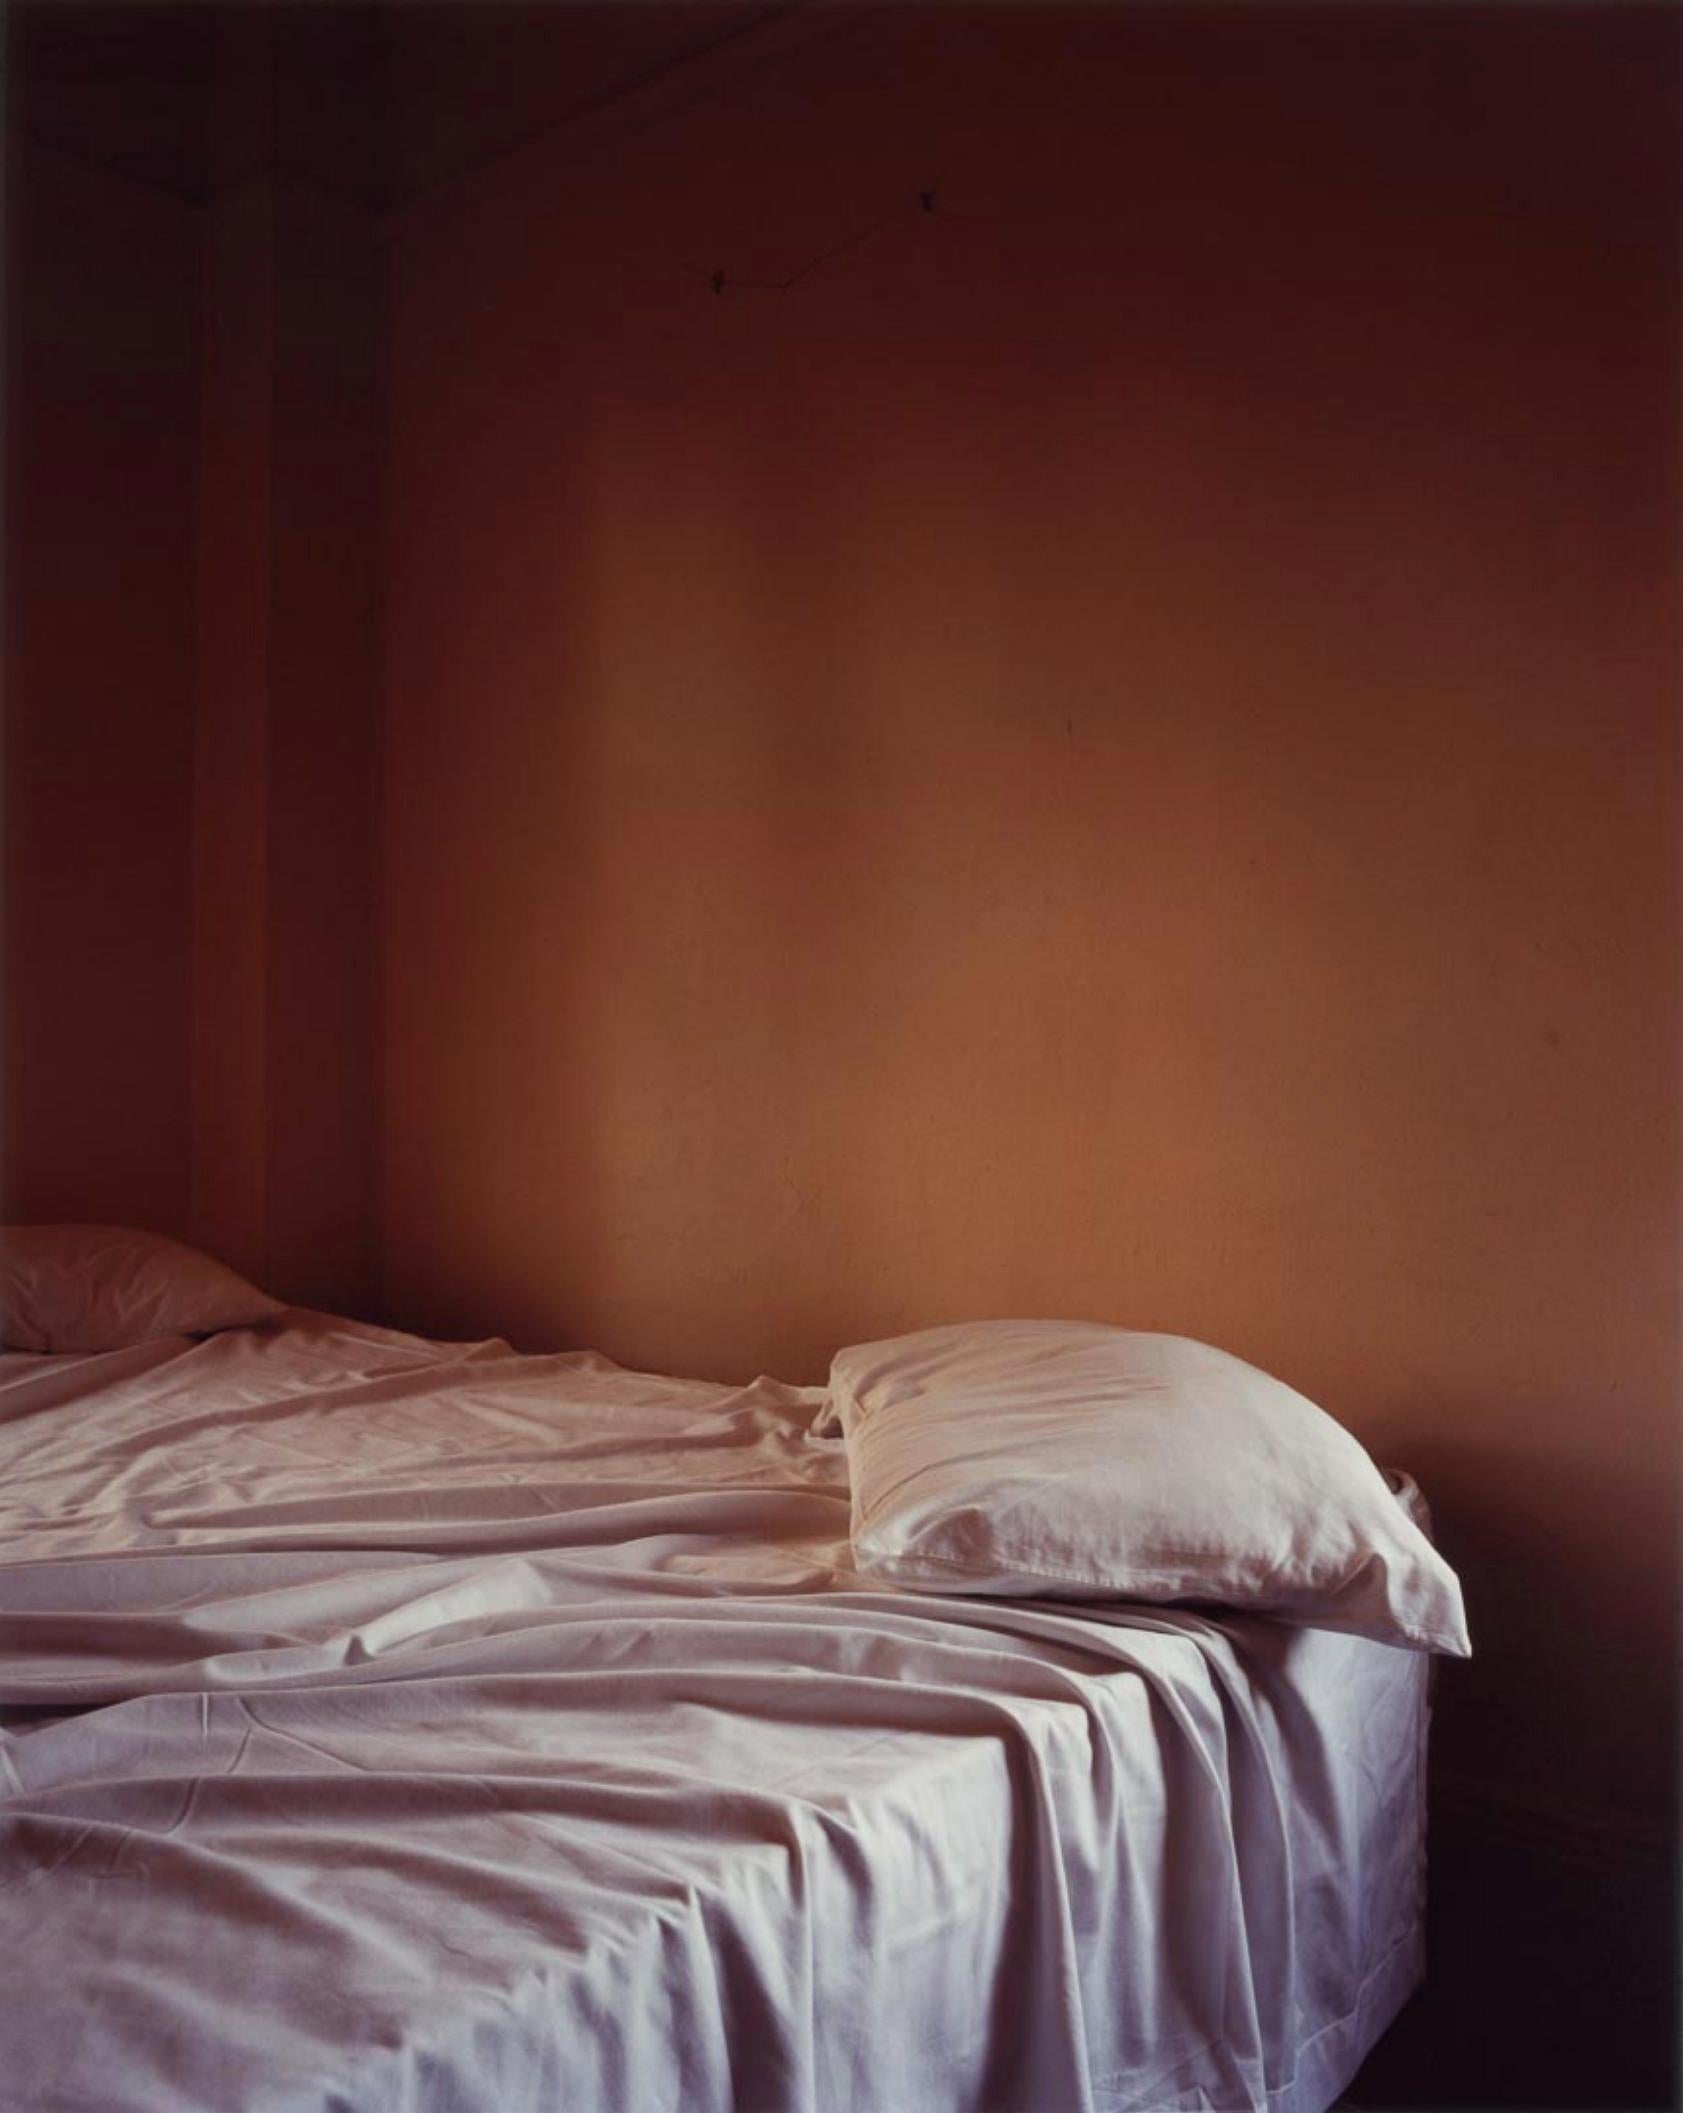 #3557-y, 2005 - Todd Hido (Colour Photography)
Signed, titled and dated on reverse
Archival pigment print

Available in three sizes:
24 x 20 inches, from an edition of 10 + 3 APs
38 x 30 inches, from an edition of 5 + 2 APs
48 x 38 inches, from an